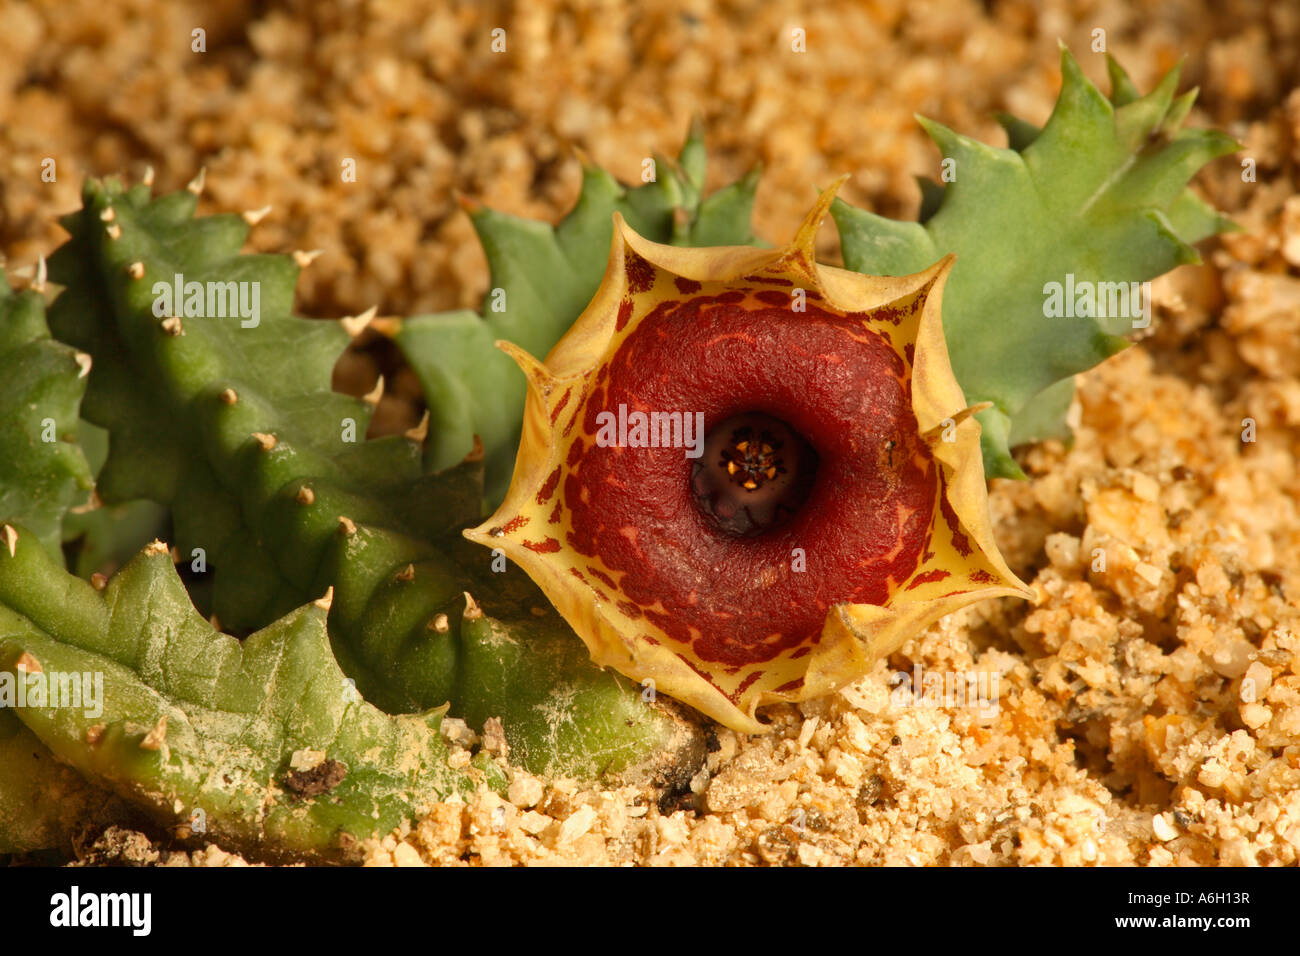 Huernia zebrina Southern Africa cultivated plant Stock Photo